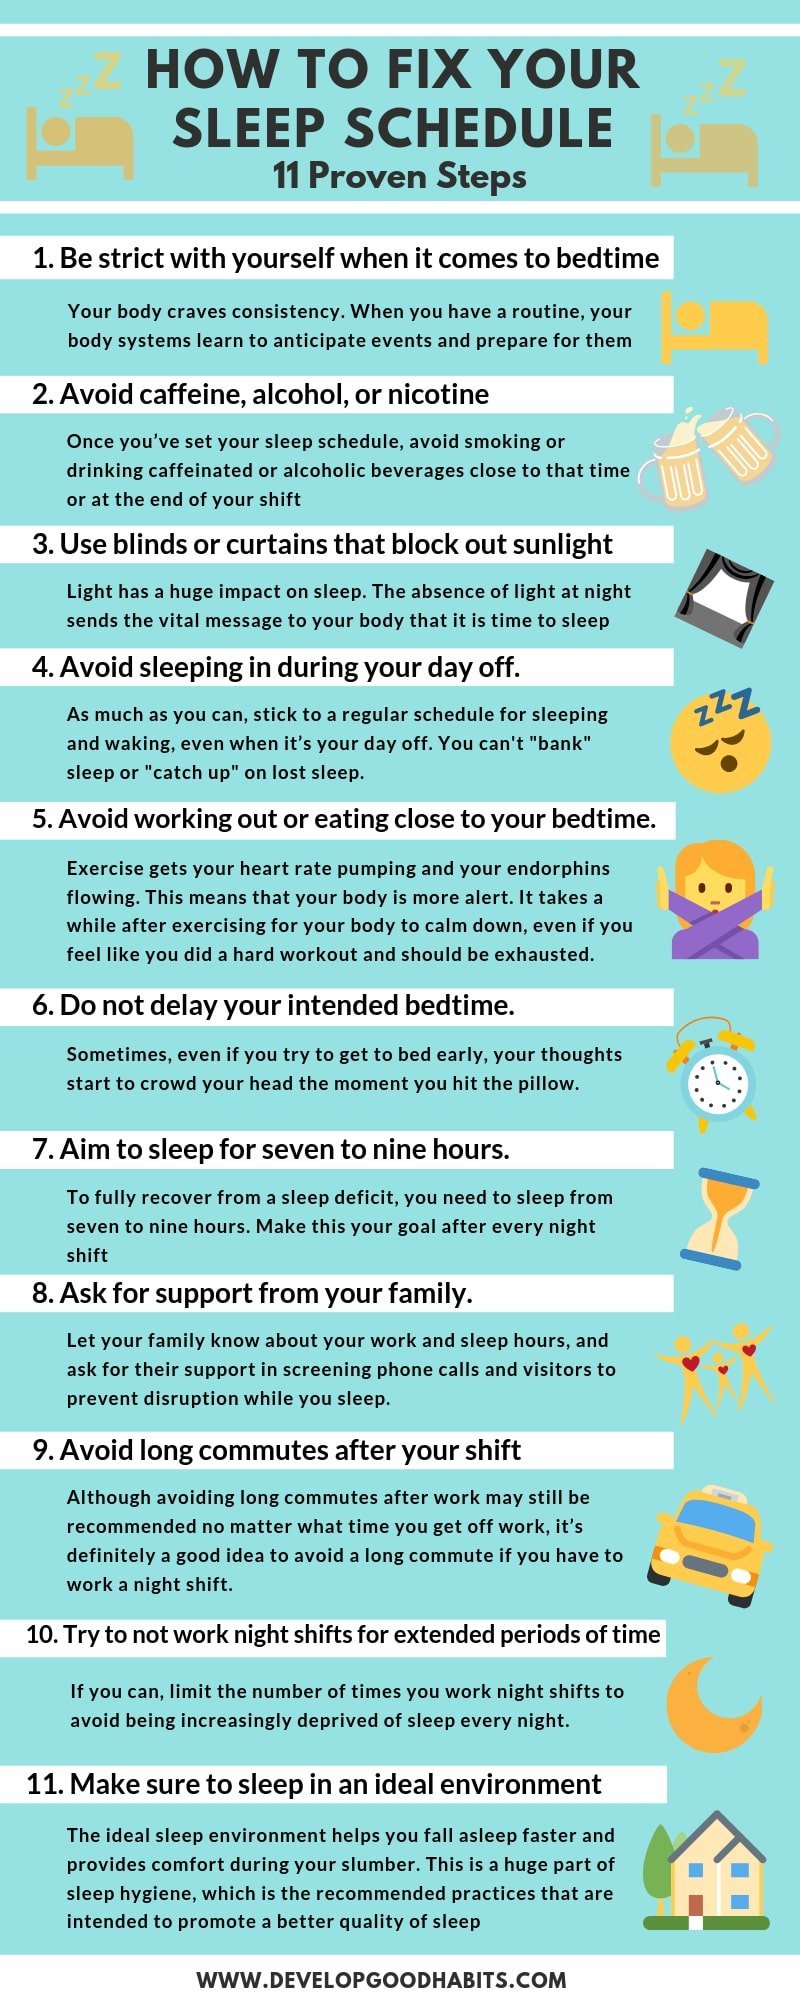 How to Fix Your Sleep Schedule — 11 Proven Steps